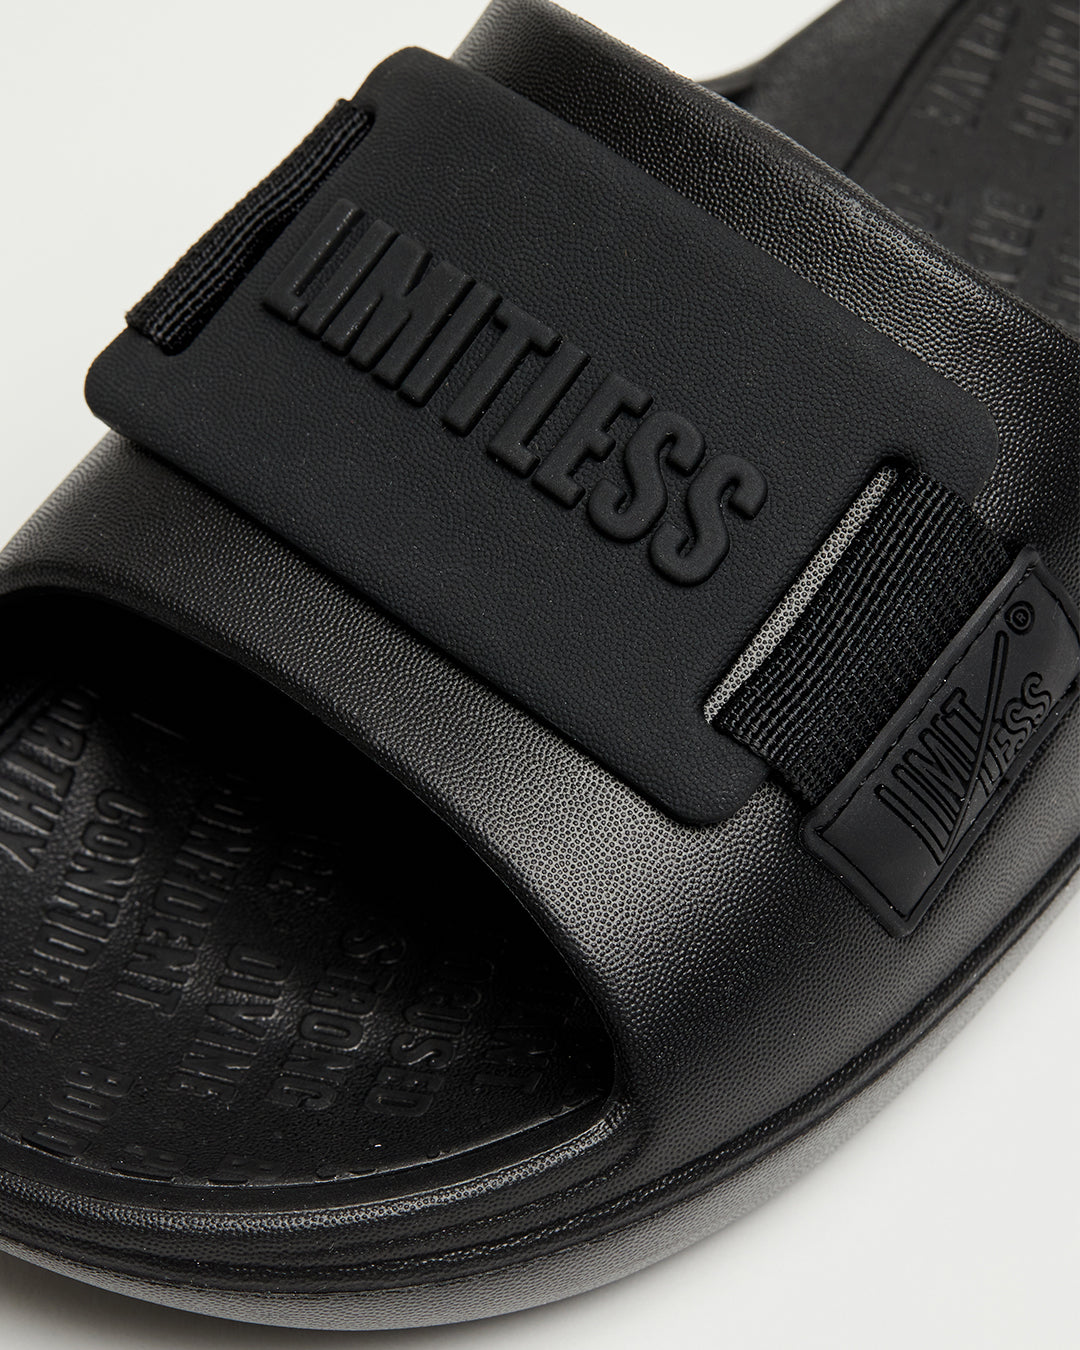 LIMITLESS SLIDES™ WITH ESSENTIAL TIBAH™ QUAD - LITTLE CHUTE HIGH SCHOOL EDITION